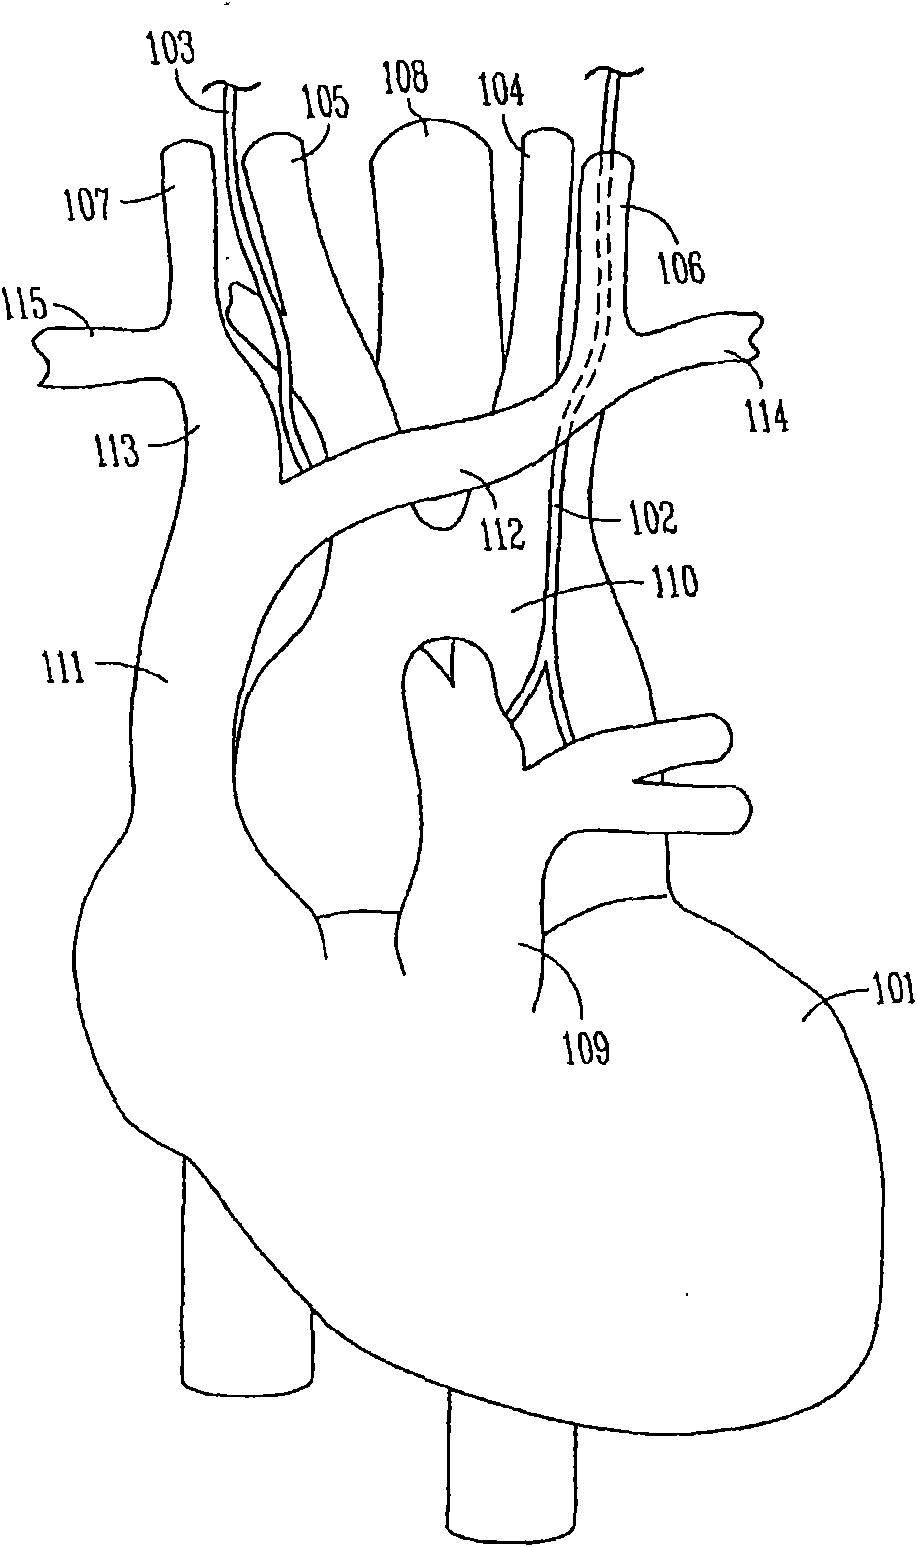 Unidirectional neural stimulation systems, devices and methods